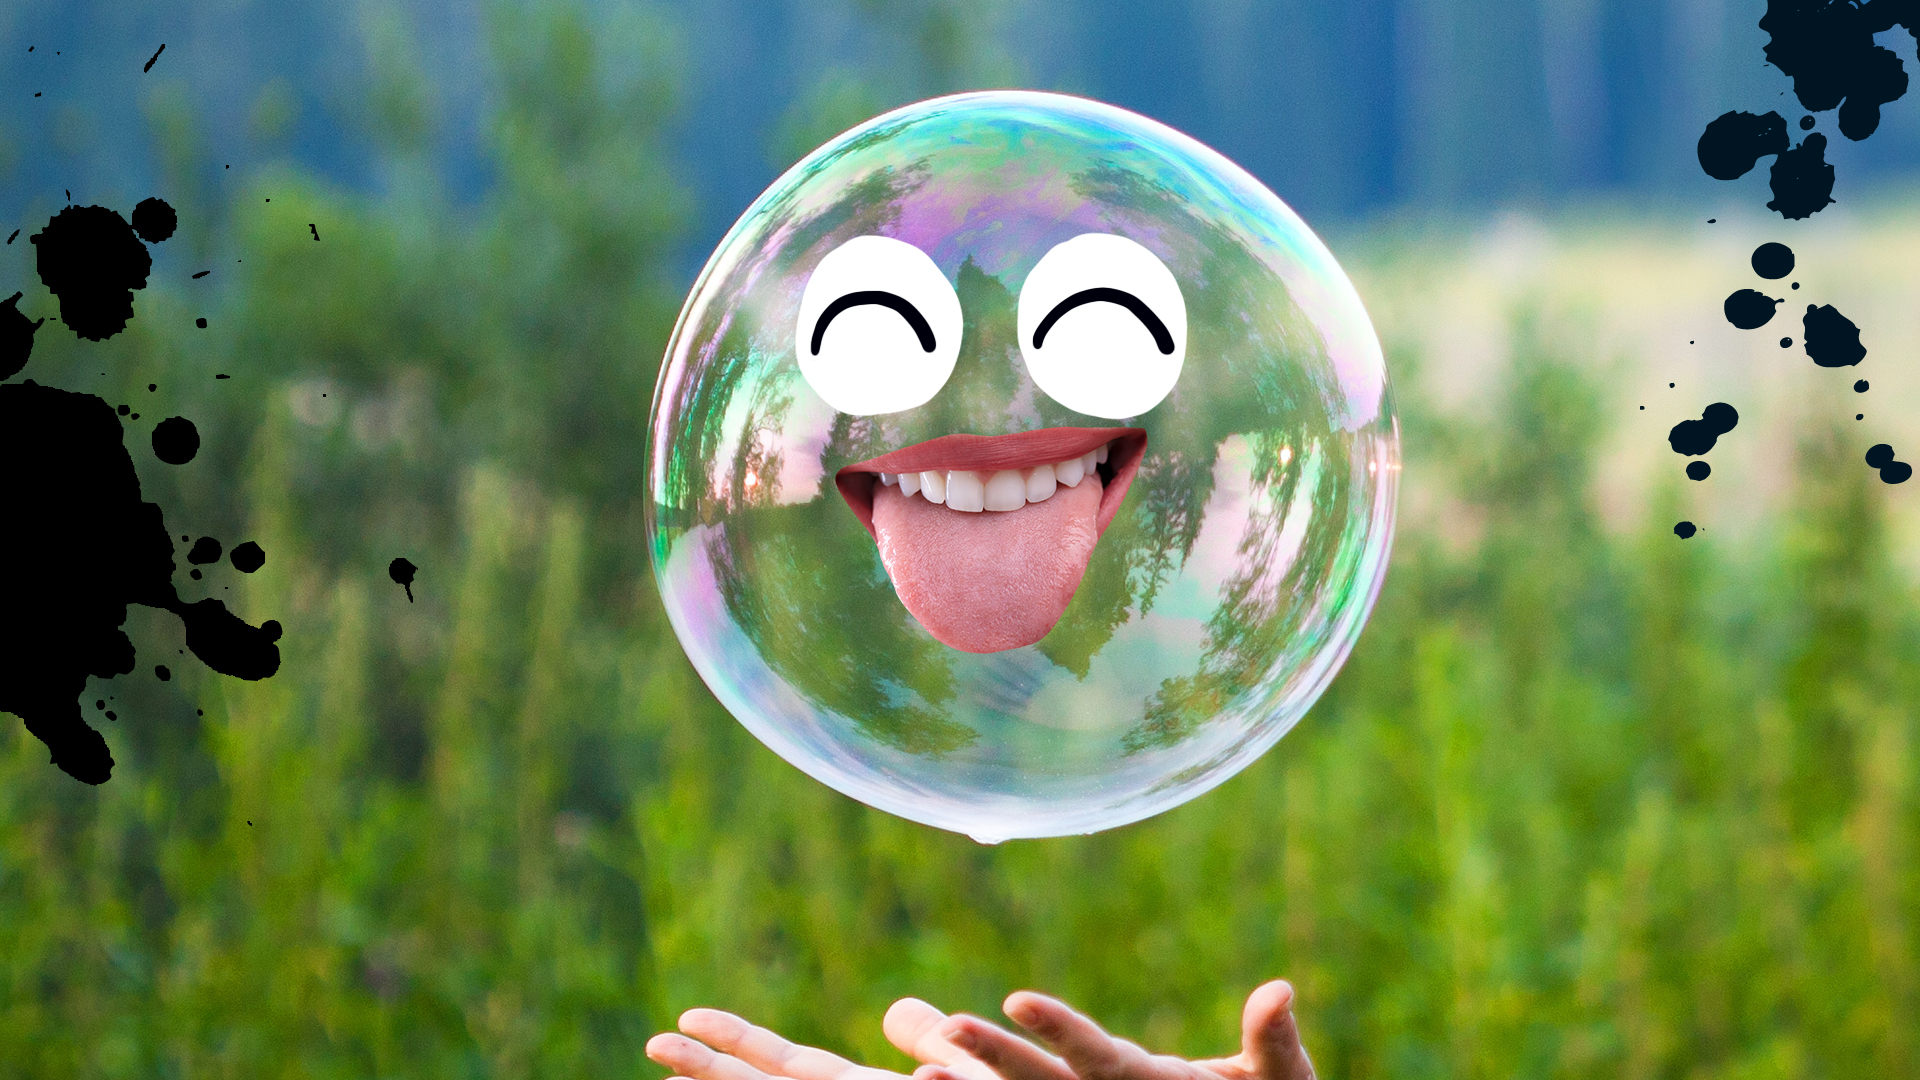 A bubble in the air